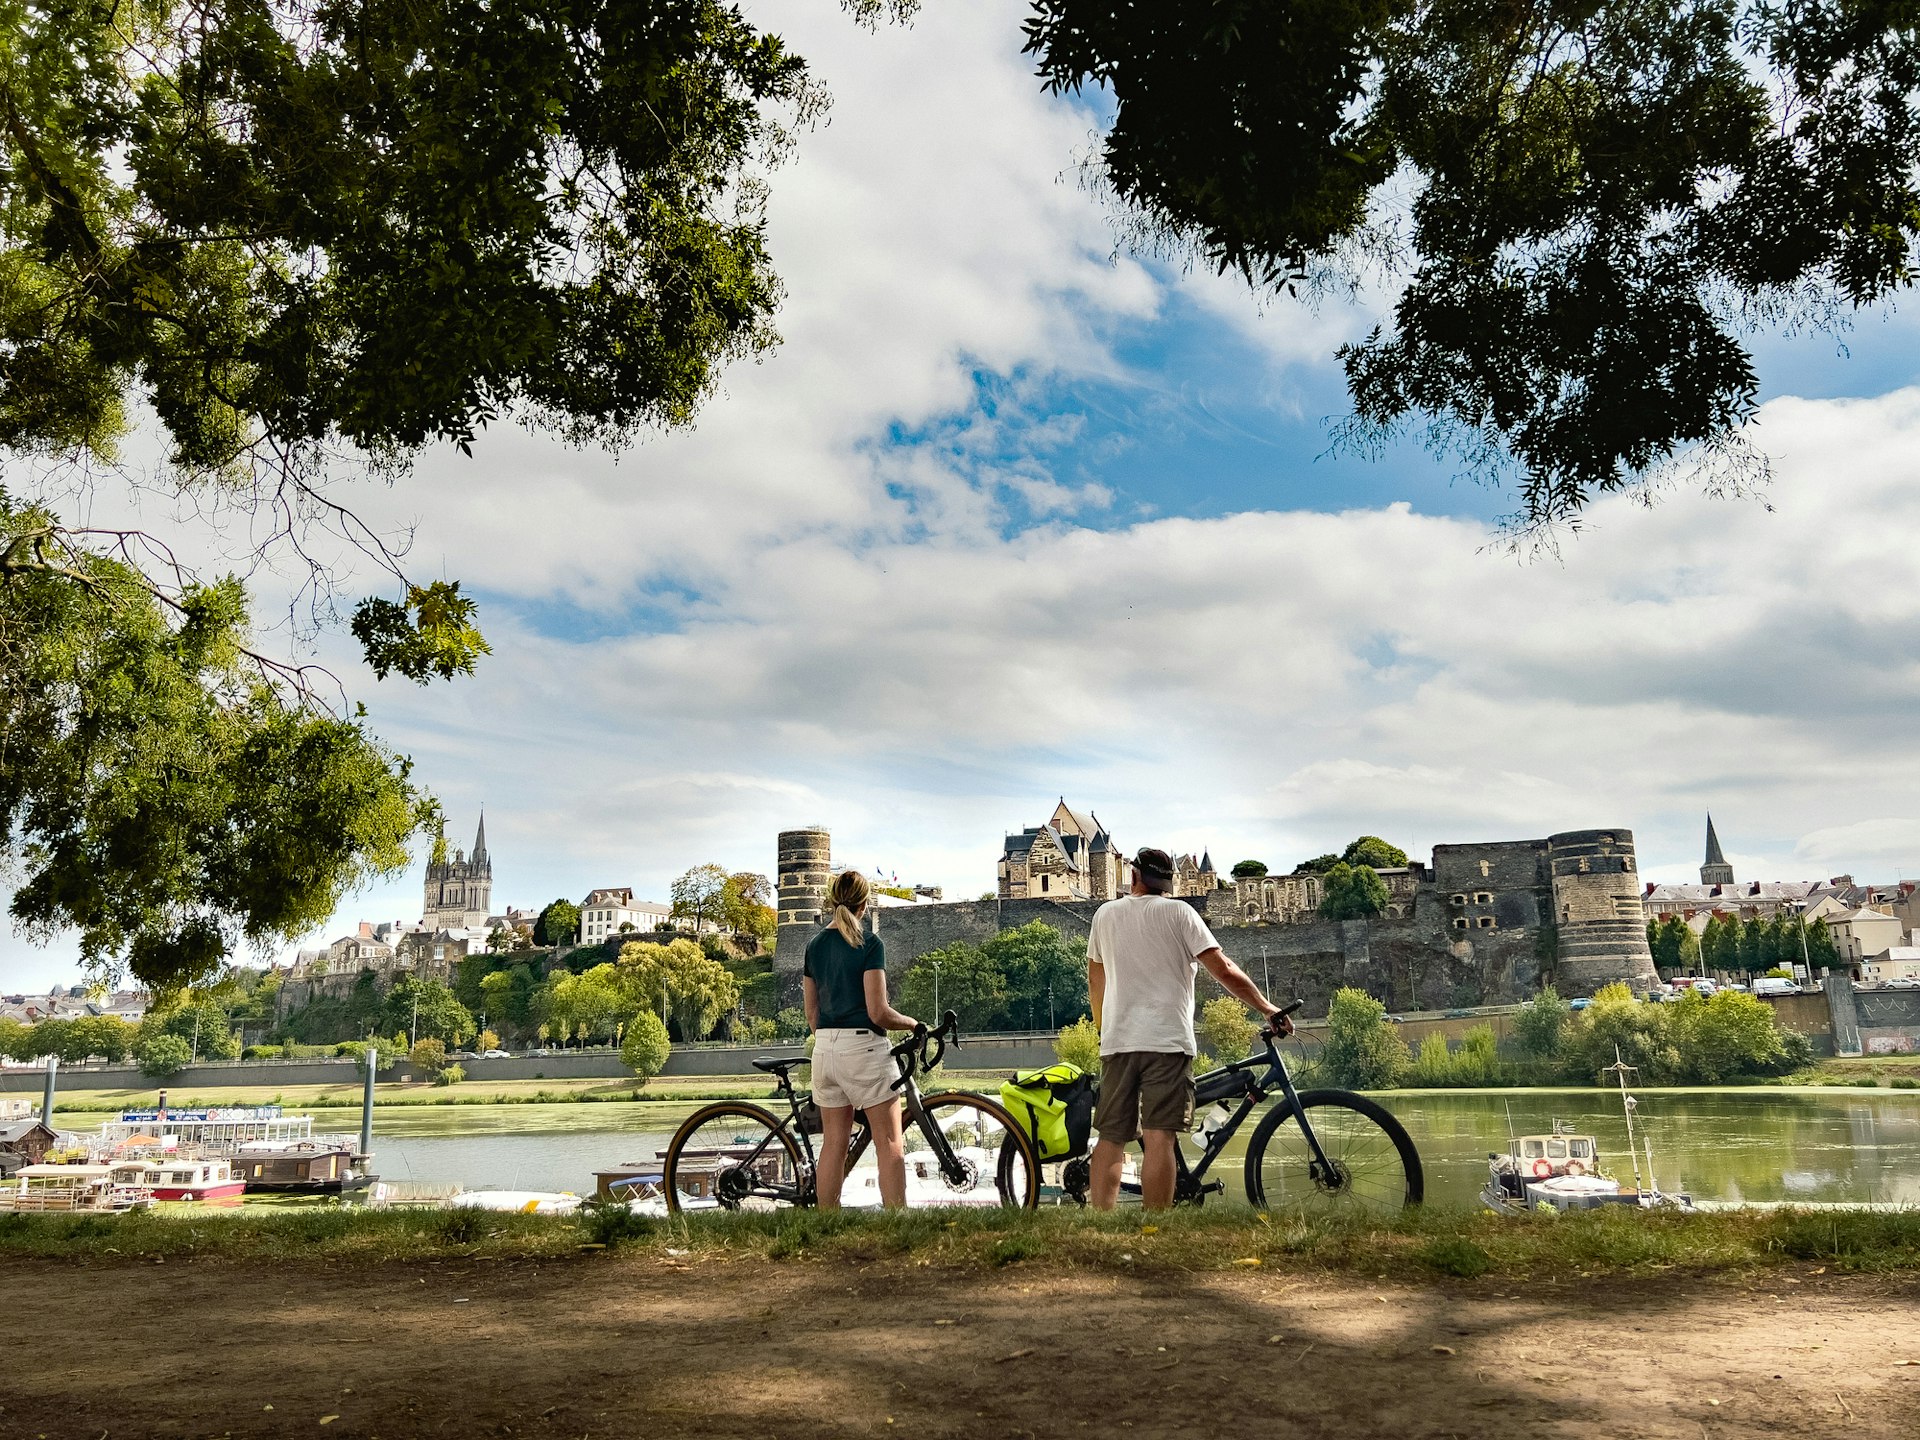 Two people pause riverside with their bikes to gaze across at a medieval city